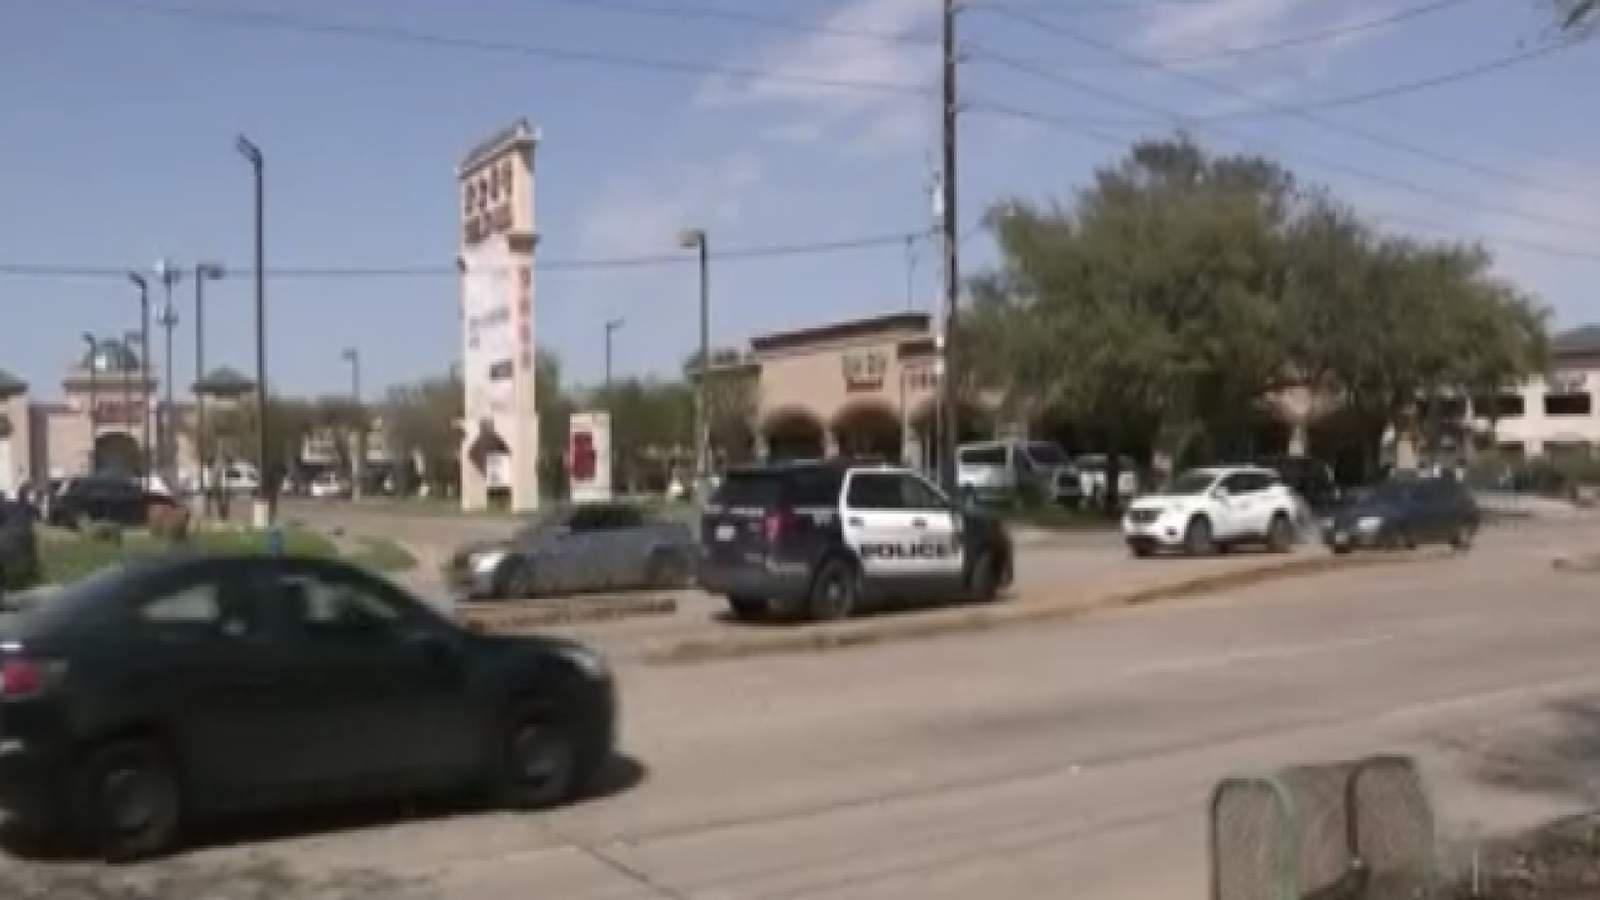 HPD patrolling Asiatown amid the rise of anti-Asian American attacks